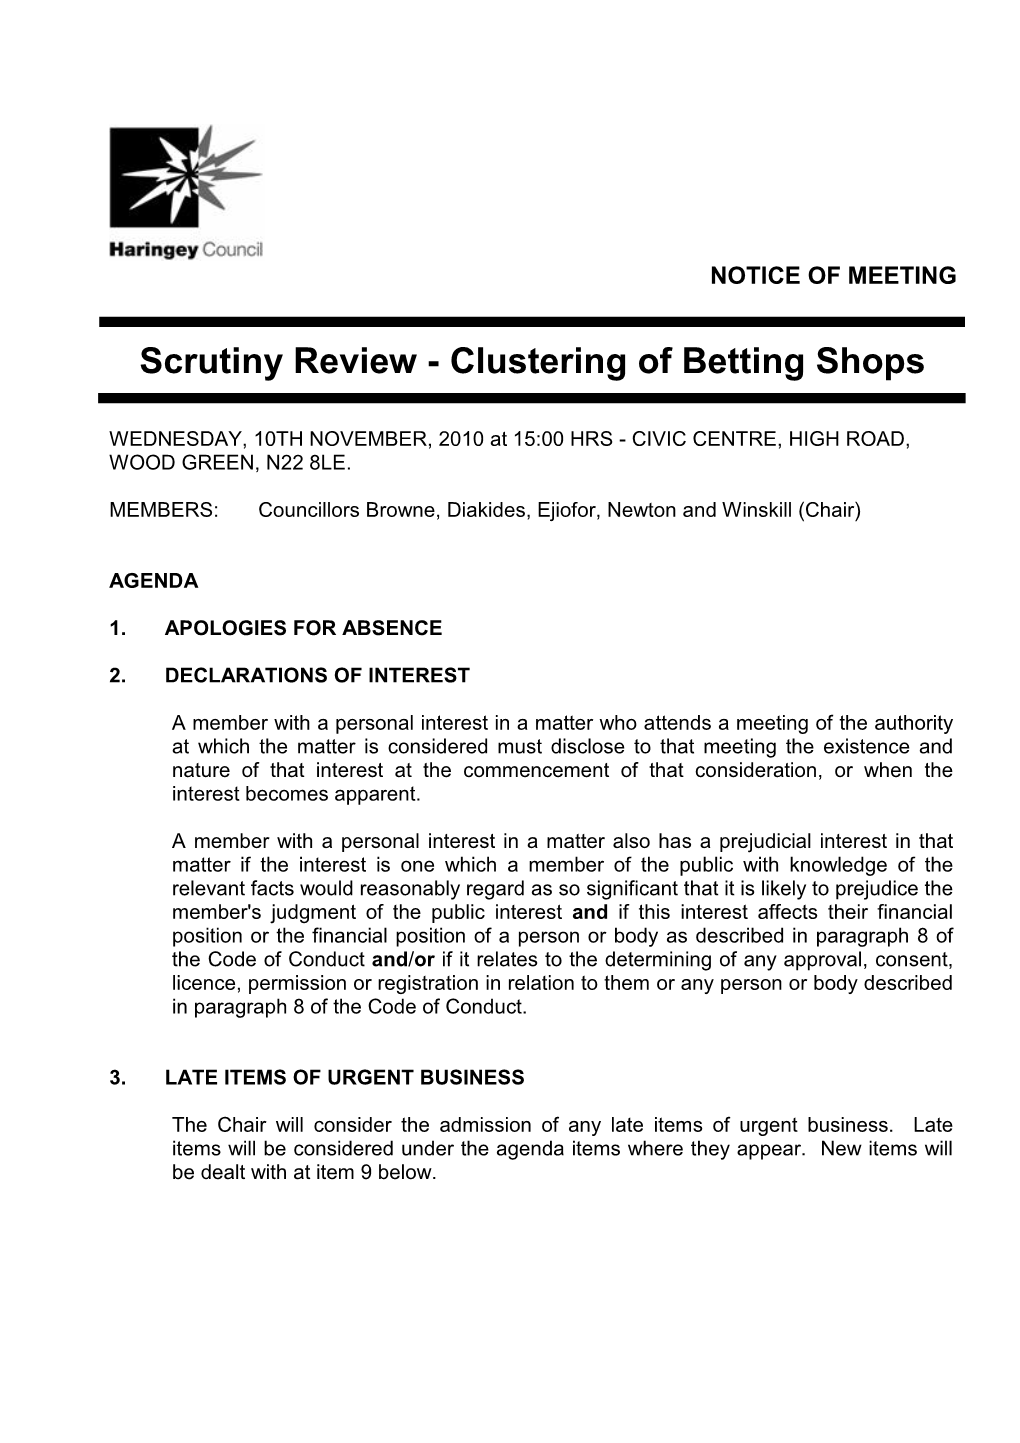 Scrutiny Review - Clustering of Betting Shops